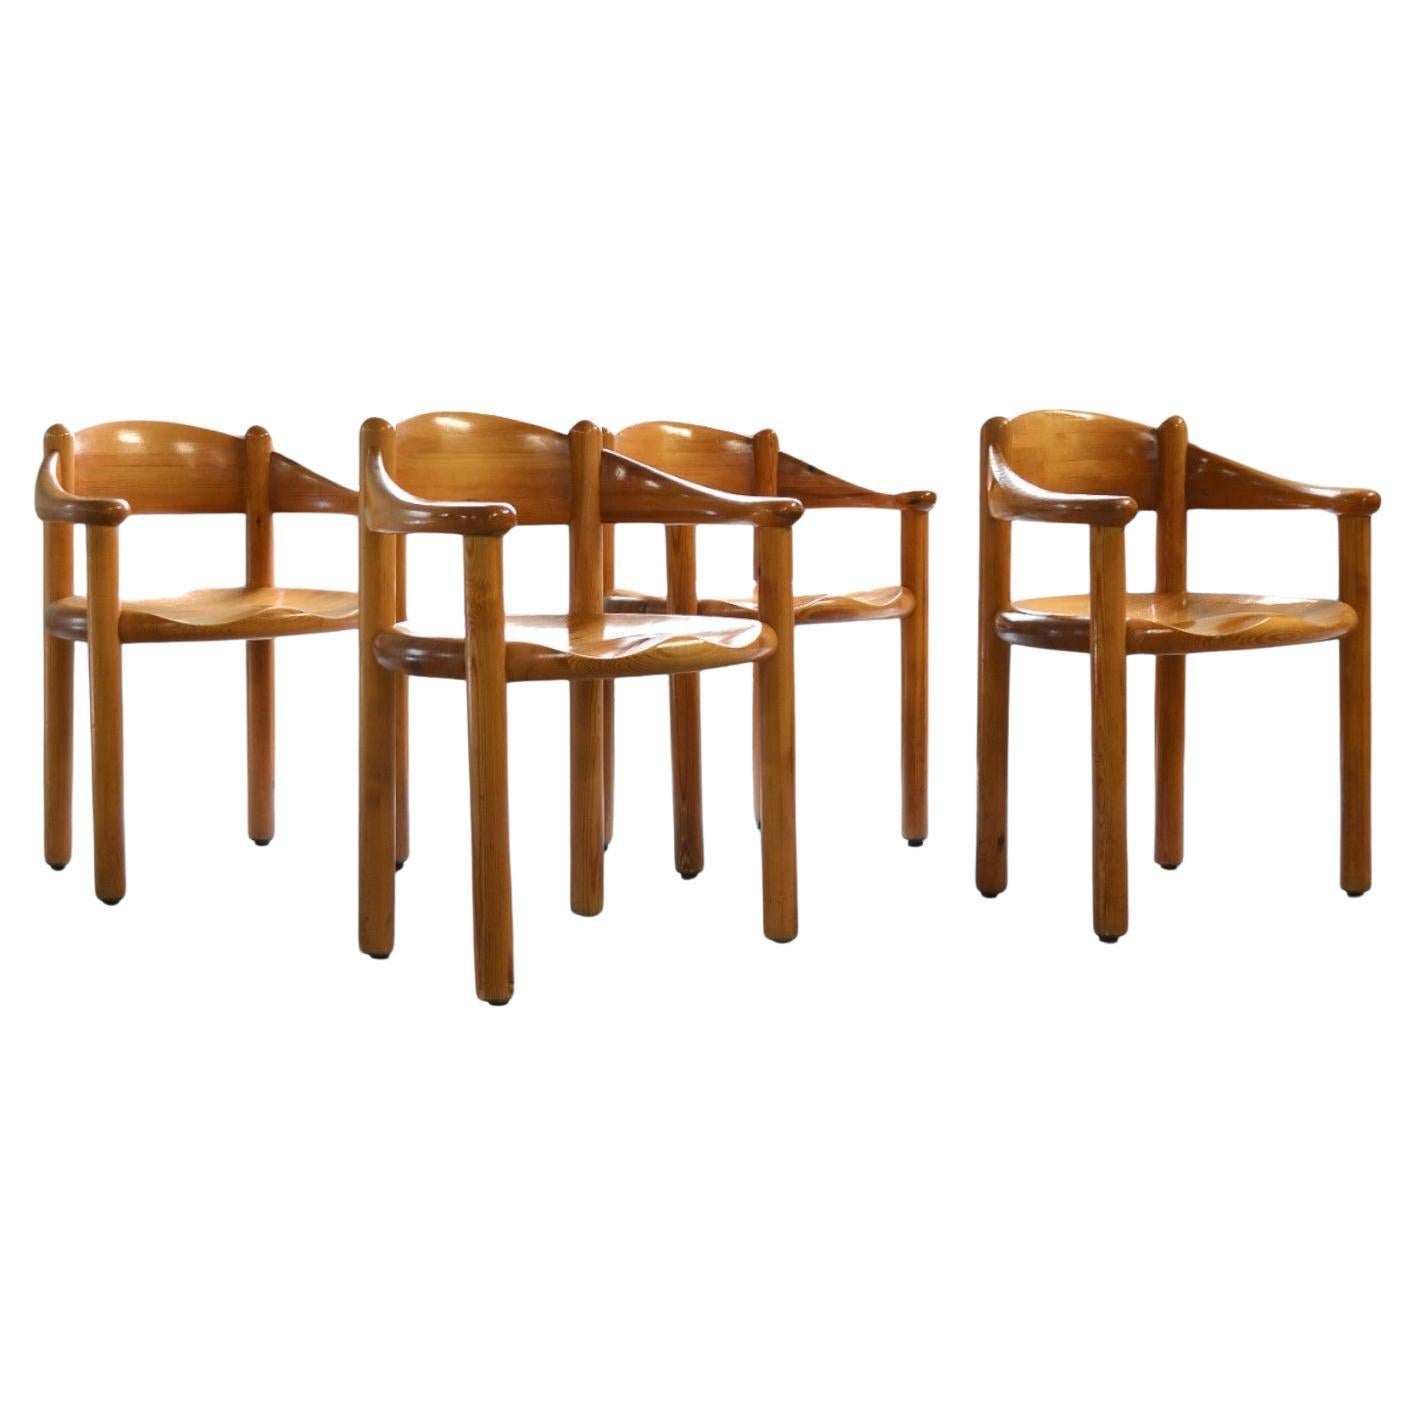 Pine Chairs, Rainer Daumiller, Denmark, 1970's For Sale